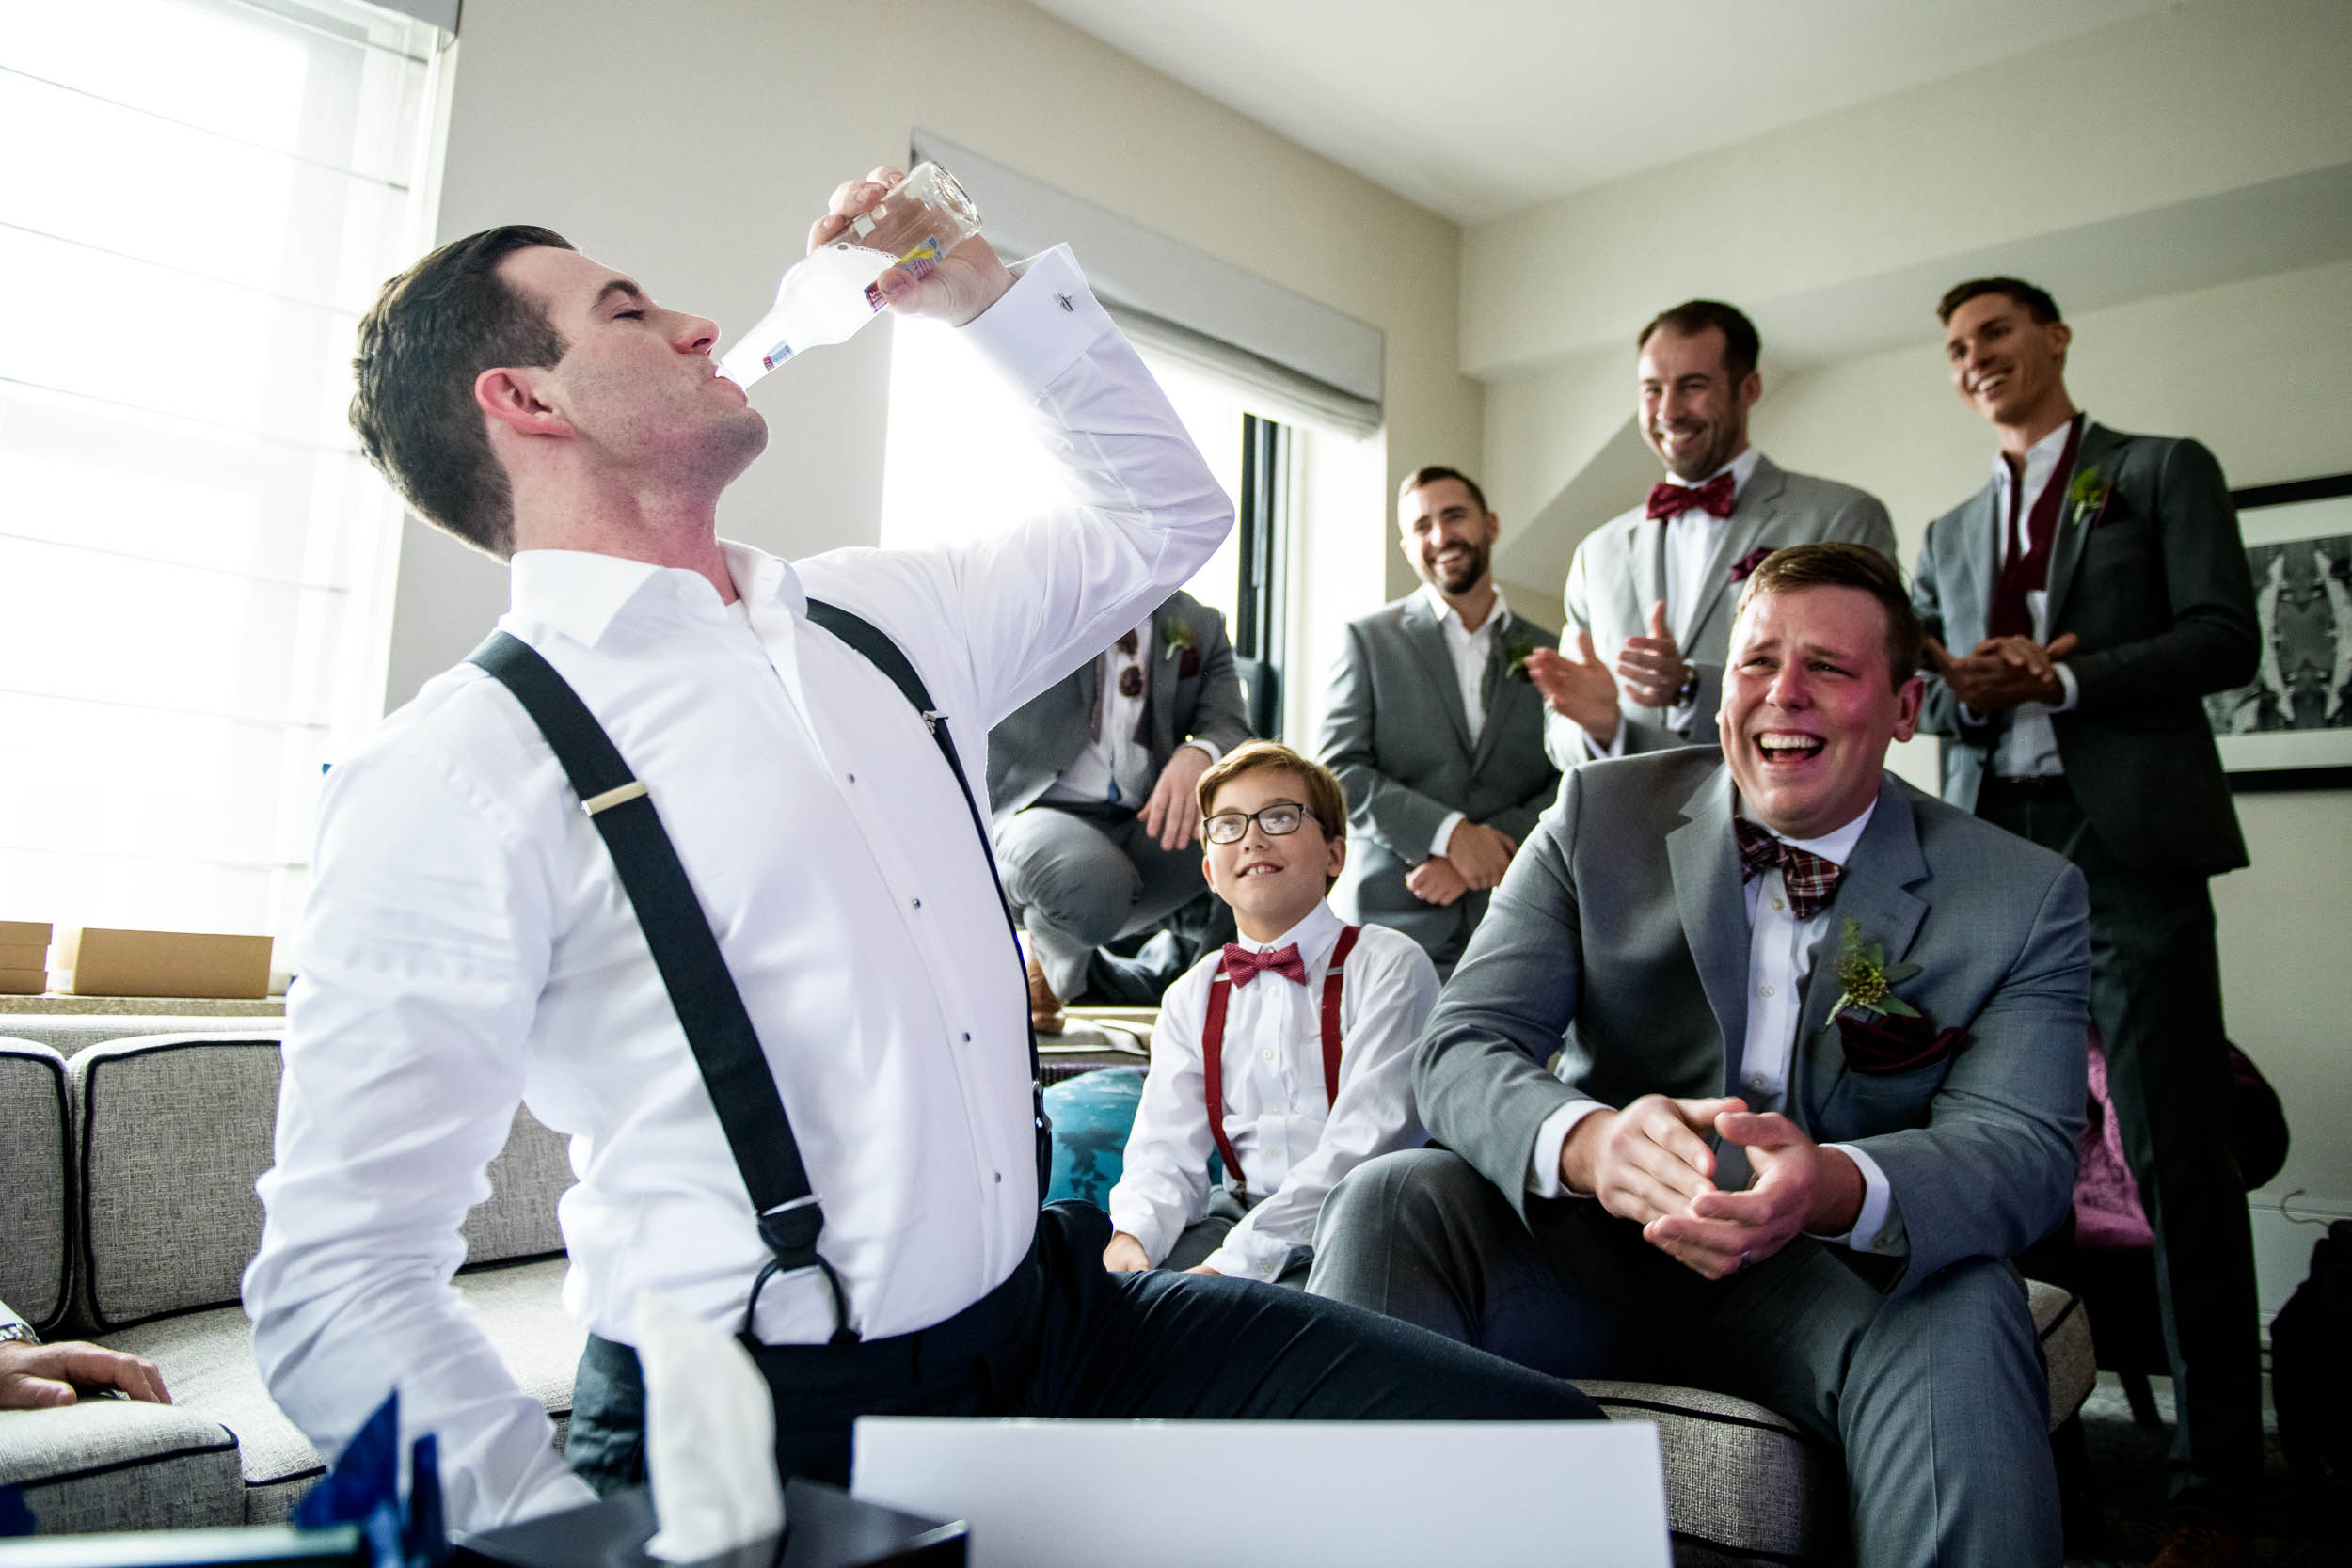 Groom getting "iced" during a Glessner House Chicago wedding.